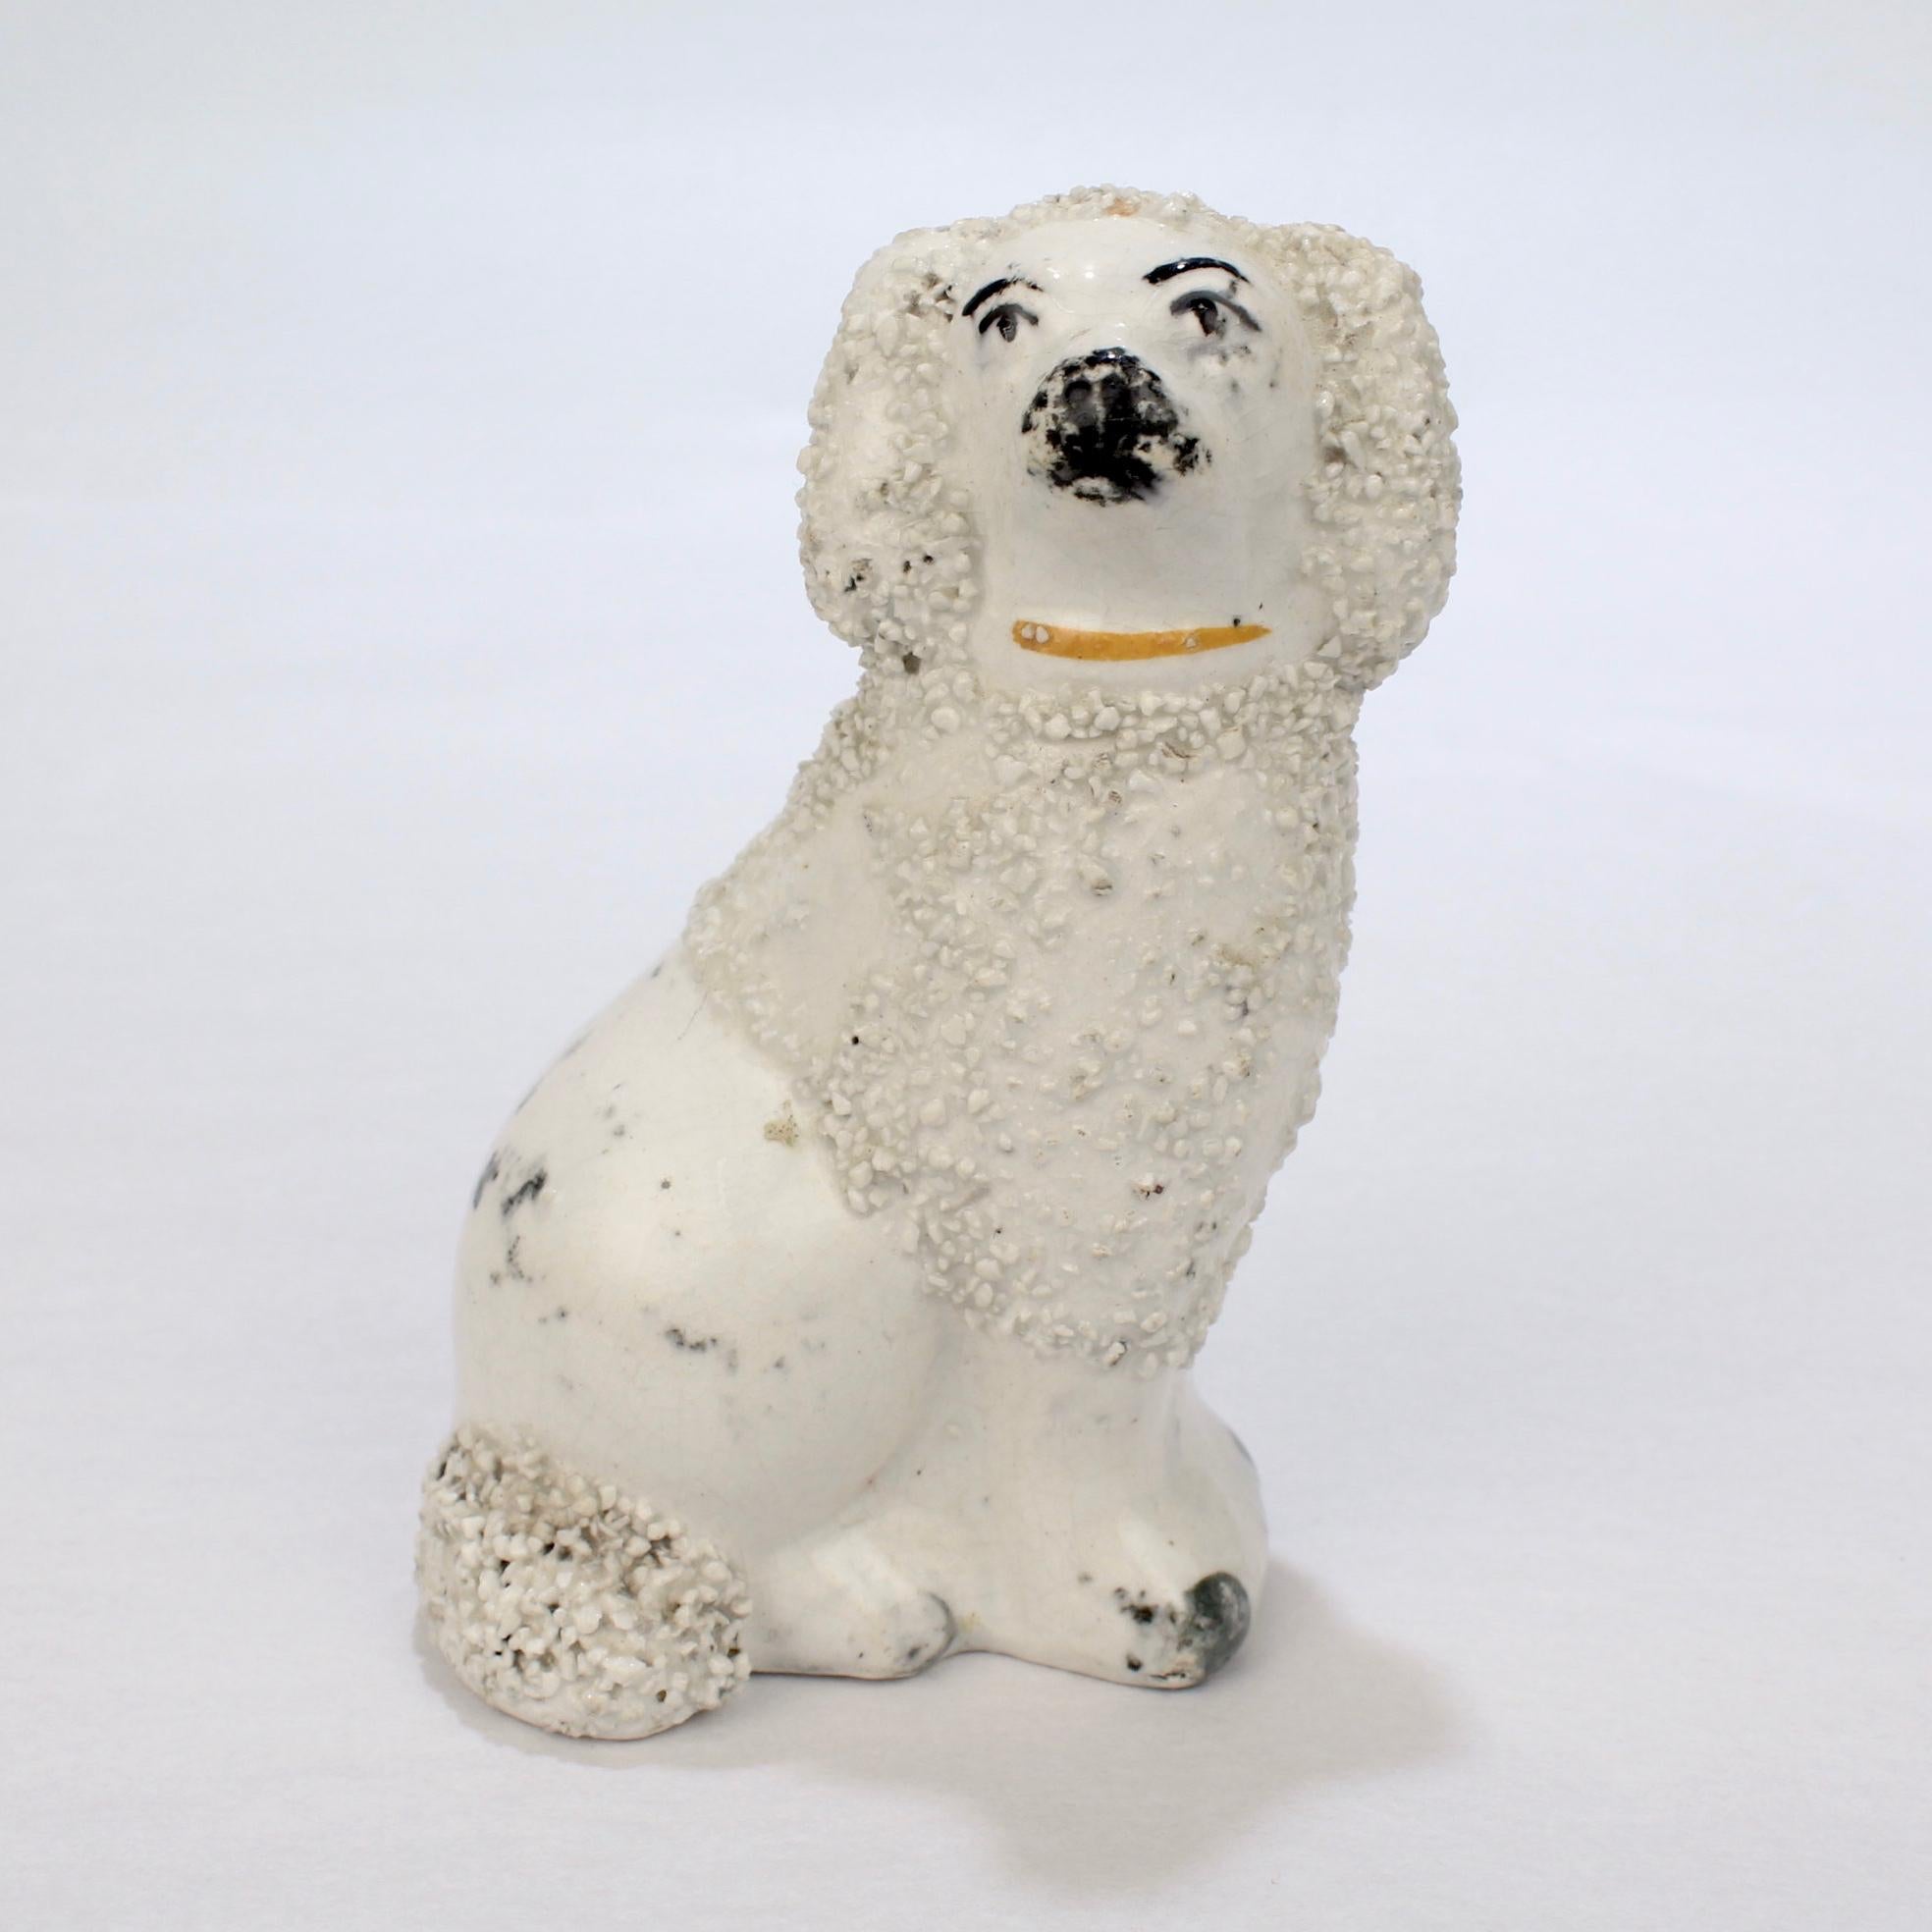 A fine antique English Staffordshire pottery figurine.

Depicting a seated Spaniel.

With confetti fur and painted black highlights.

Simply a wonderful Staffordshire dog figurine!

Date: 
Mid to Late 19th Century

Overall Condition:
It is in